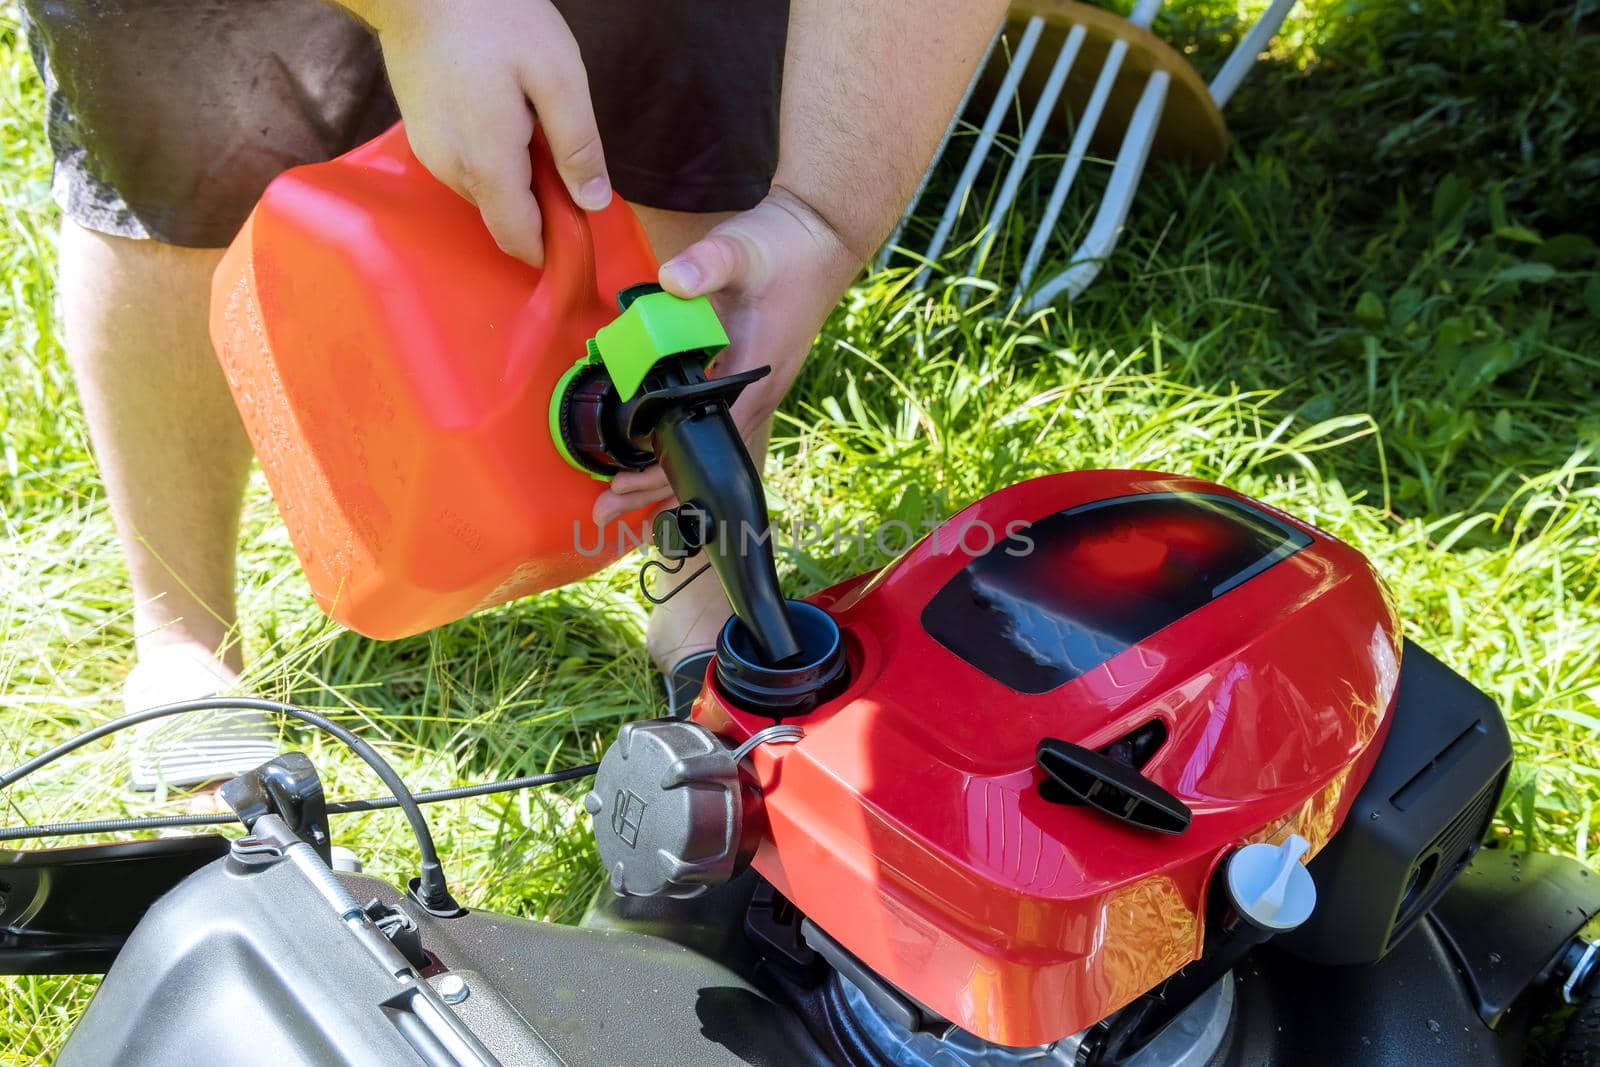 Pouring gasoline gallon refueling into the tank of lawn mower